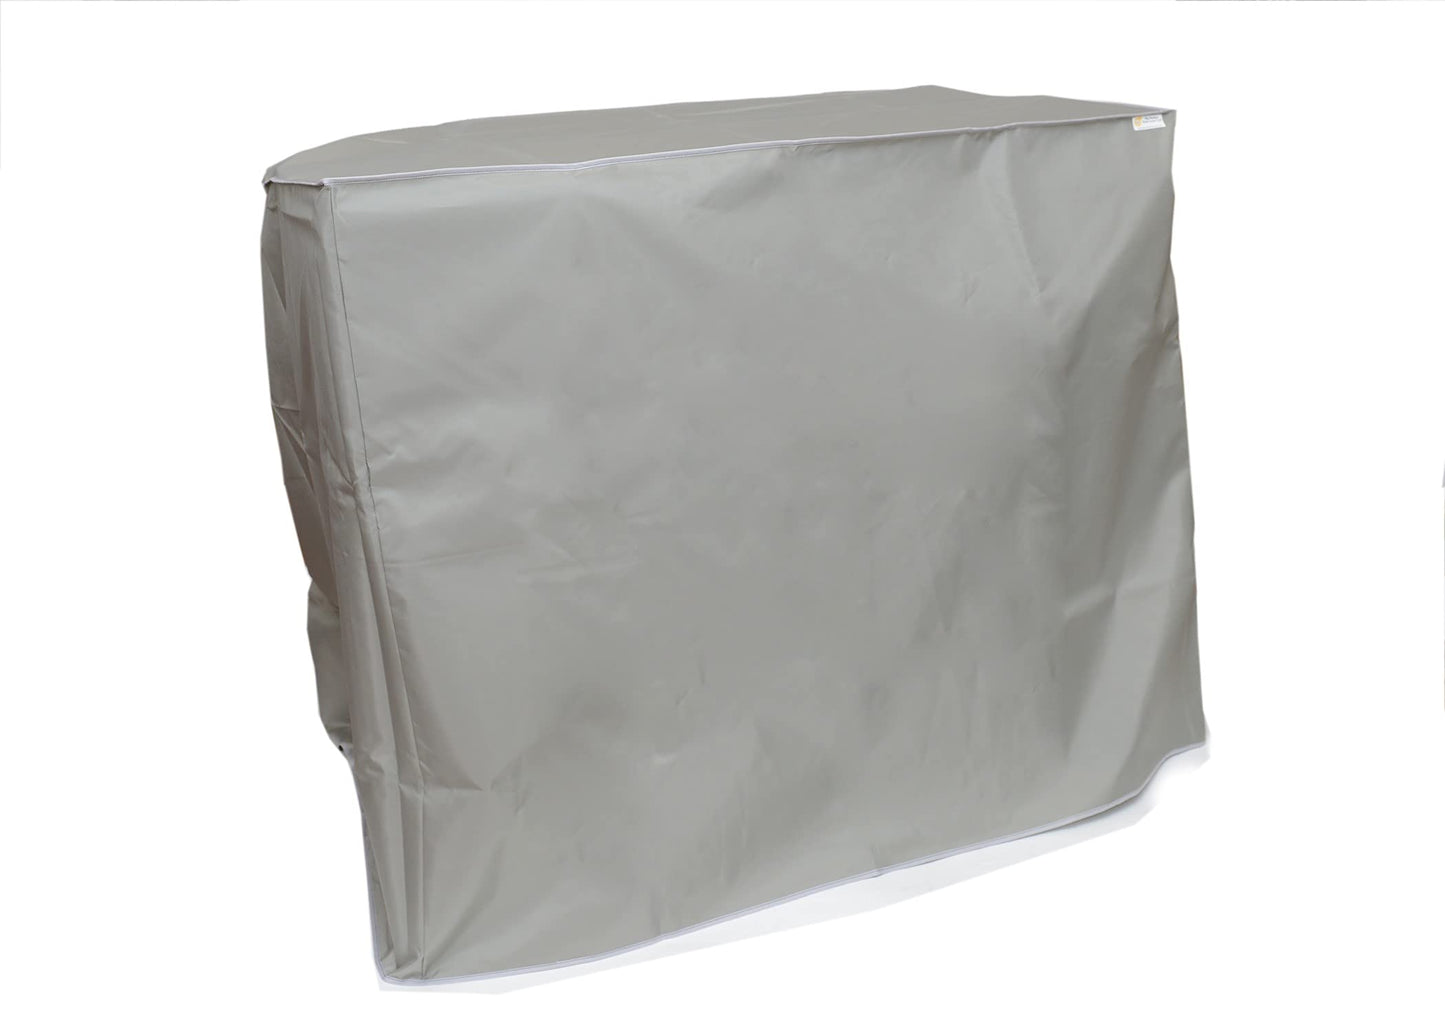 The Perfect Dust Cover, Silver Gray Nylon Cover Compatible with HP Latex 800 64-in Wide Format Inkjet Printer, Anti Static and Waterproof Dust Cover by The Perfect Dust Cover LLC